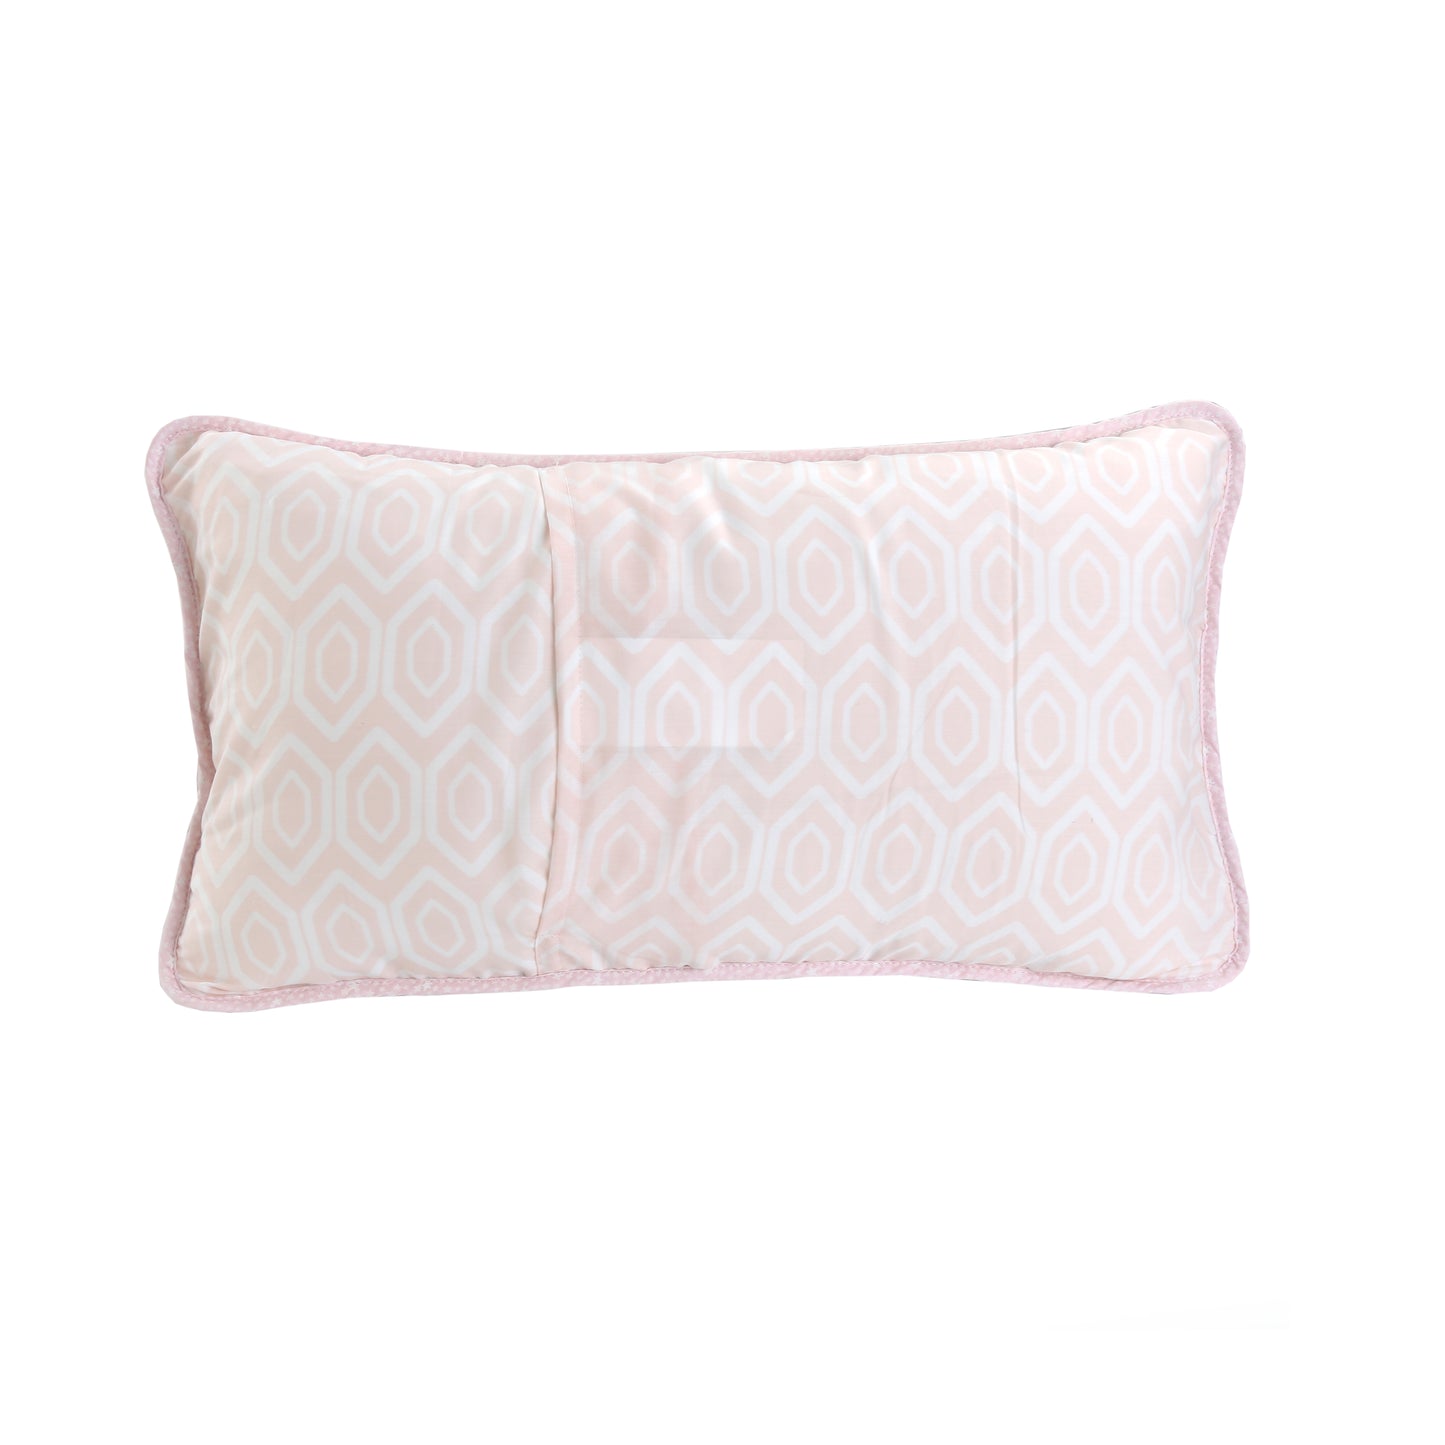 Pretty in Pink Girly Ruffle Star Stripped Embroidered Rectangular Décor Throw Pillow